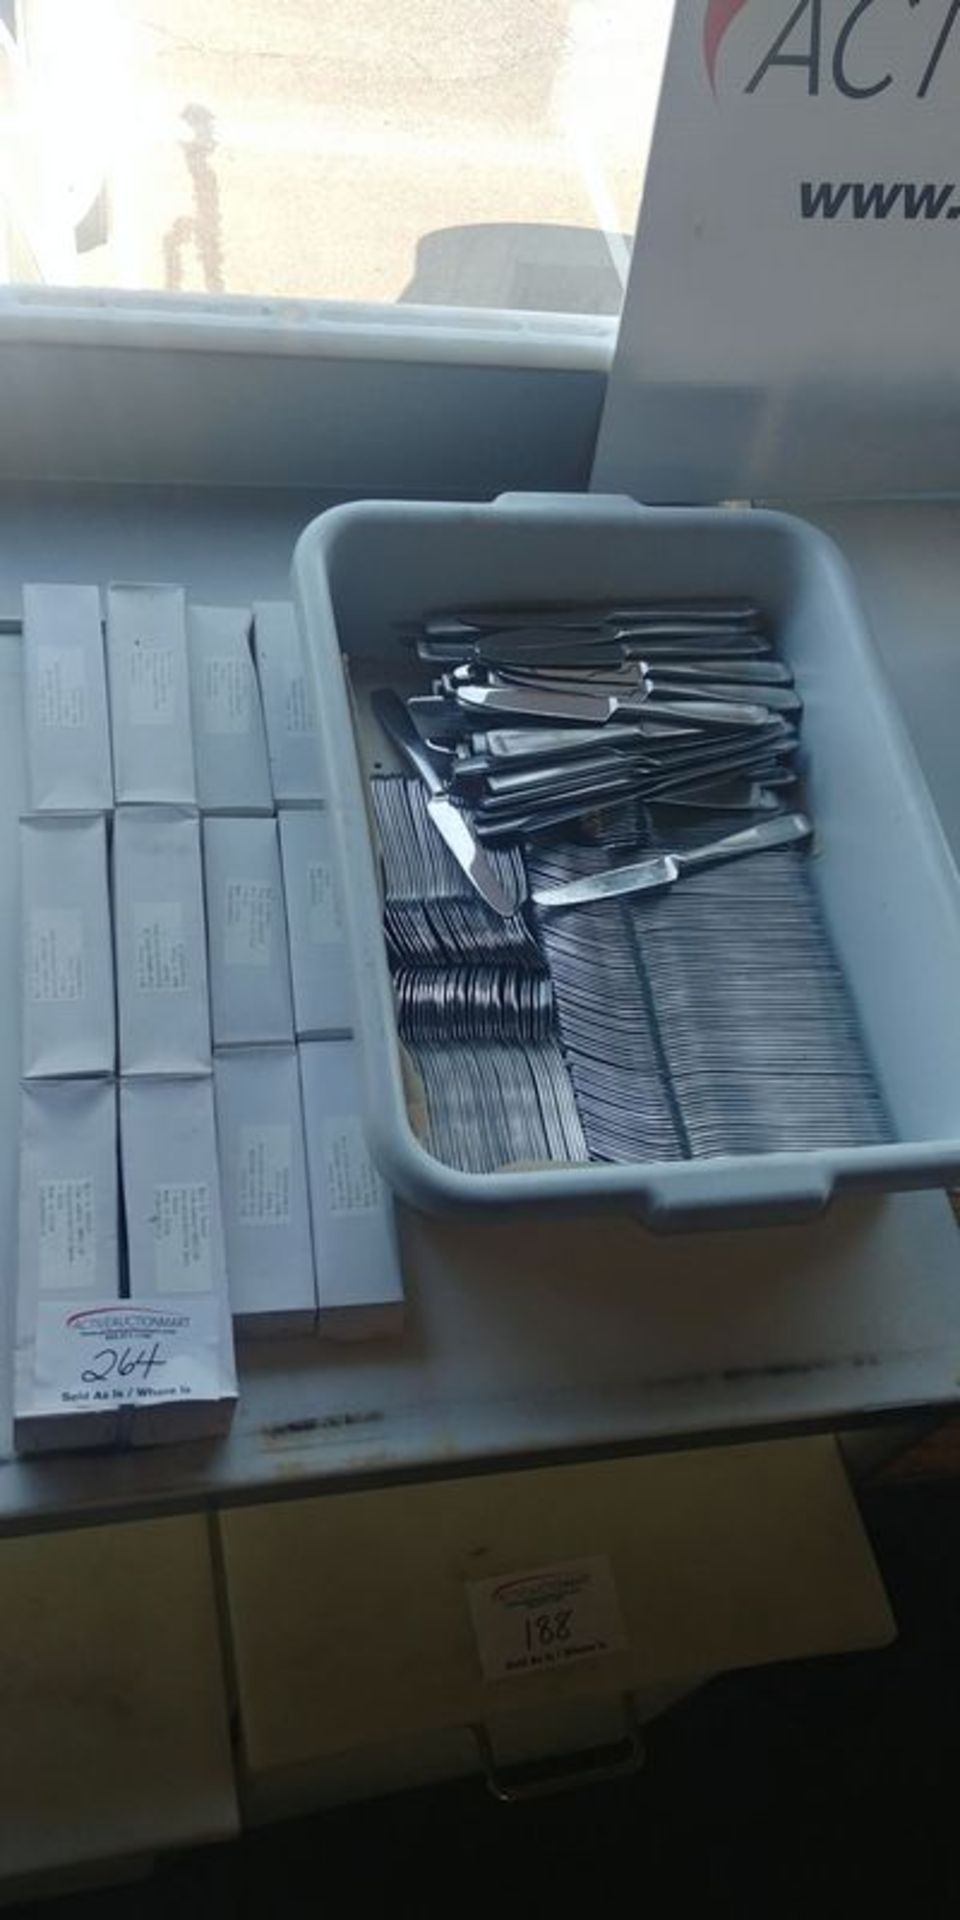 Approx. 72 Sets of Unused Cutlery